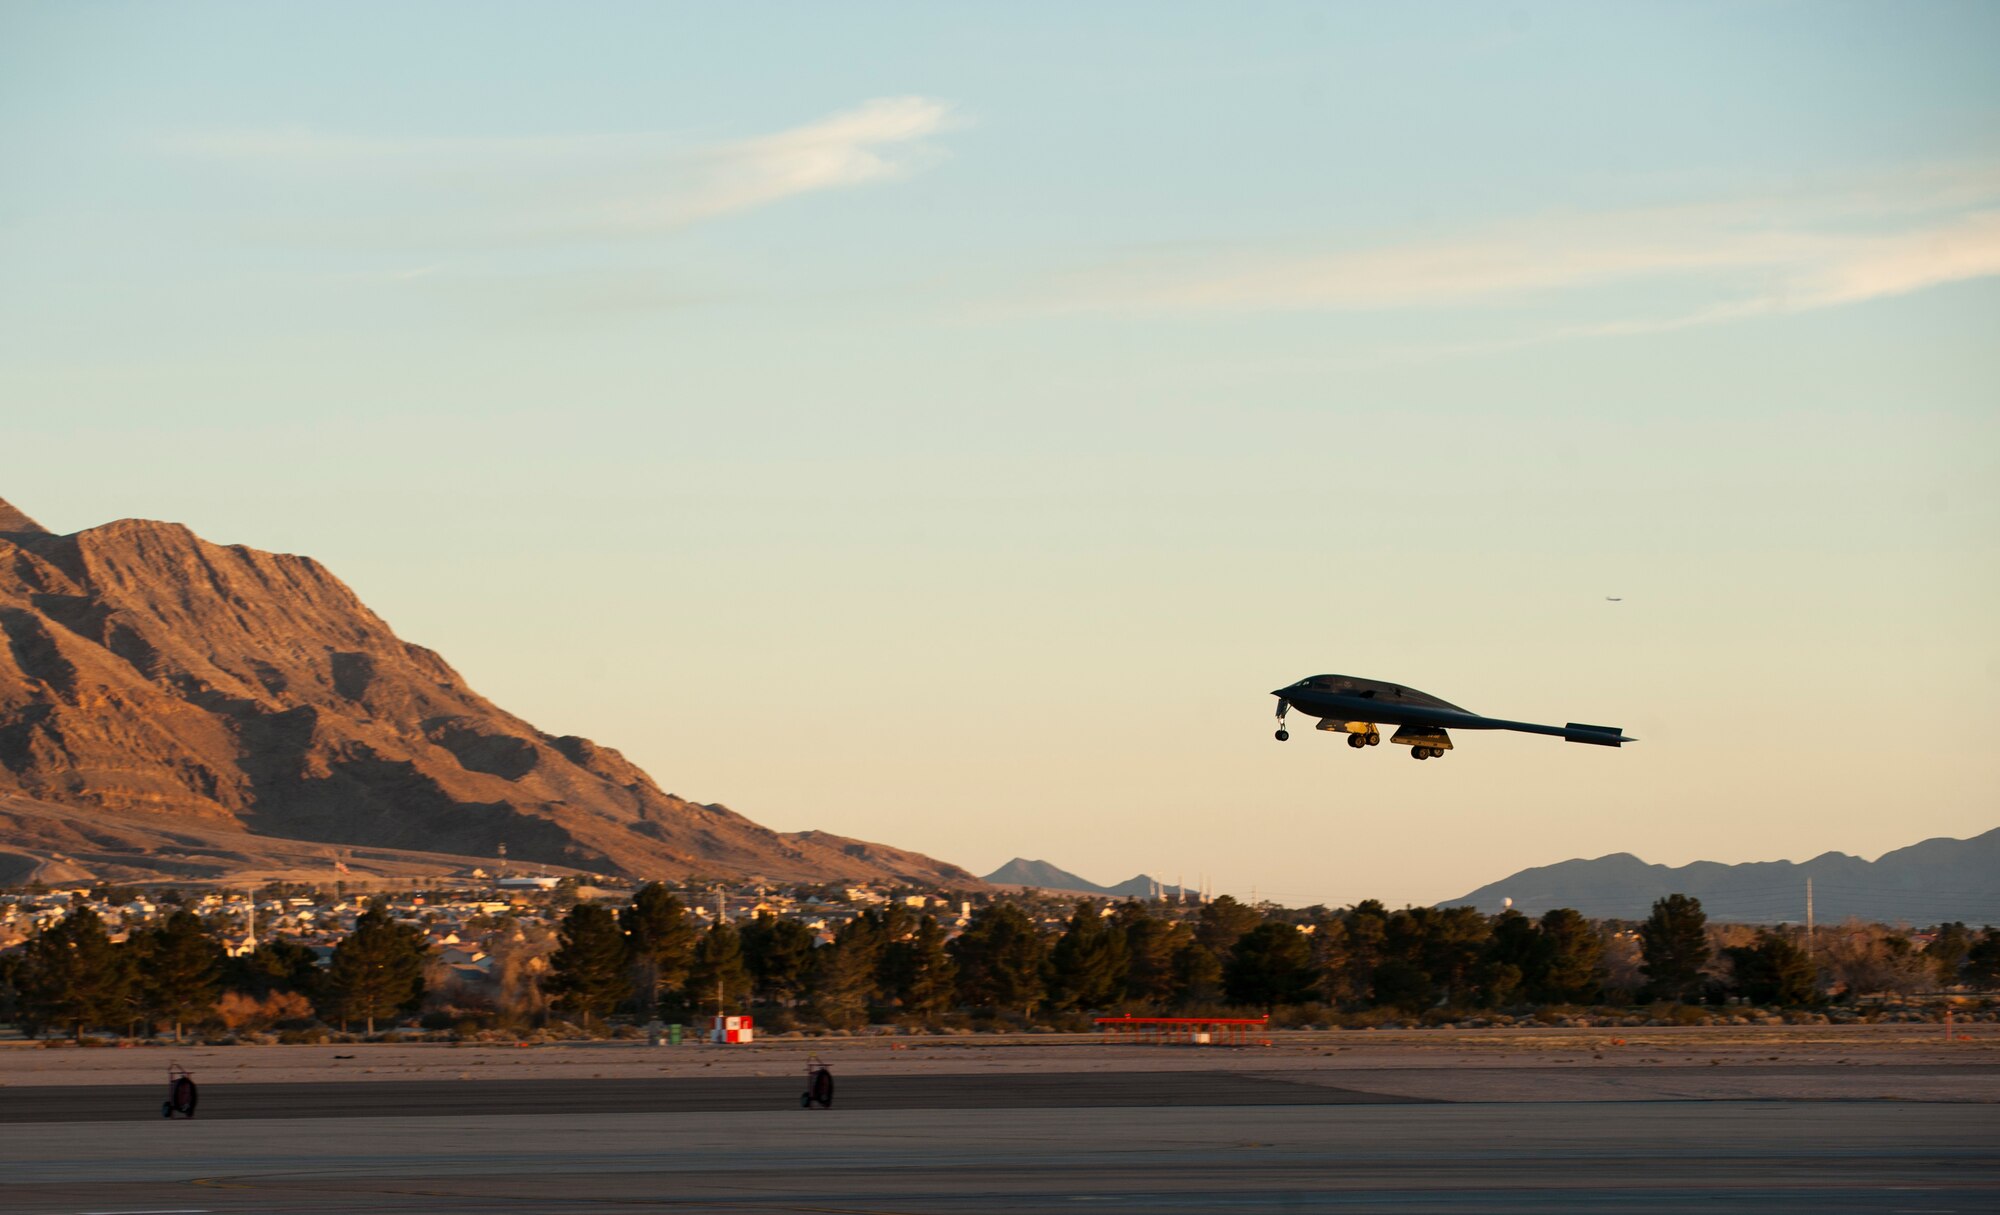 A B-2 Spirit assigned to the 393rd Bomb Squadron, Whiteman Air Force Base, Mo., lands after a training mission during Red Flag 15-1 at Nellis AFB, Nev., Feb. 6, 2015. Red Flag is an exercise hosted at Nellis AFB, Nev. that provides aircrews an opportunity to experience realistic, stressful combat situations in a controlled environment to increase mission capability. (U.S. Air Force photo by Senior Airman Thomas Spangler)